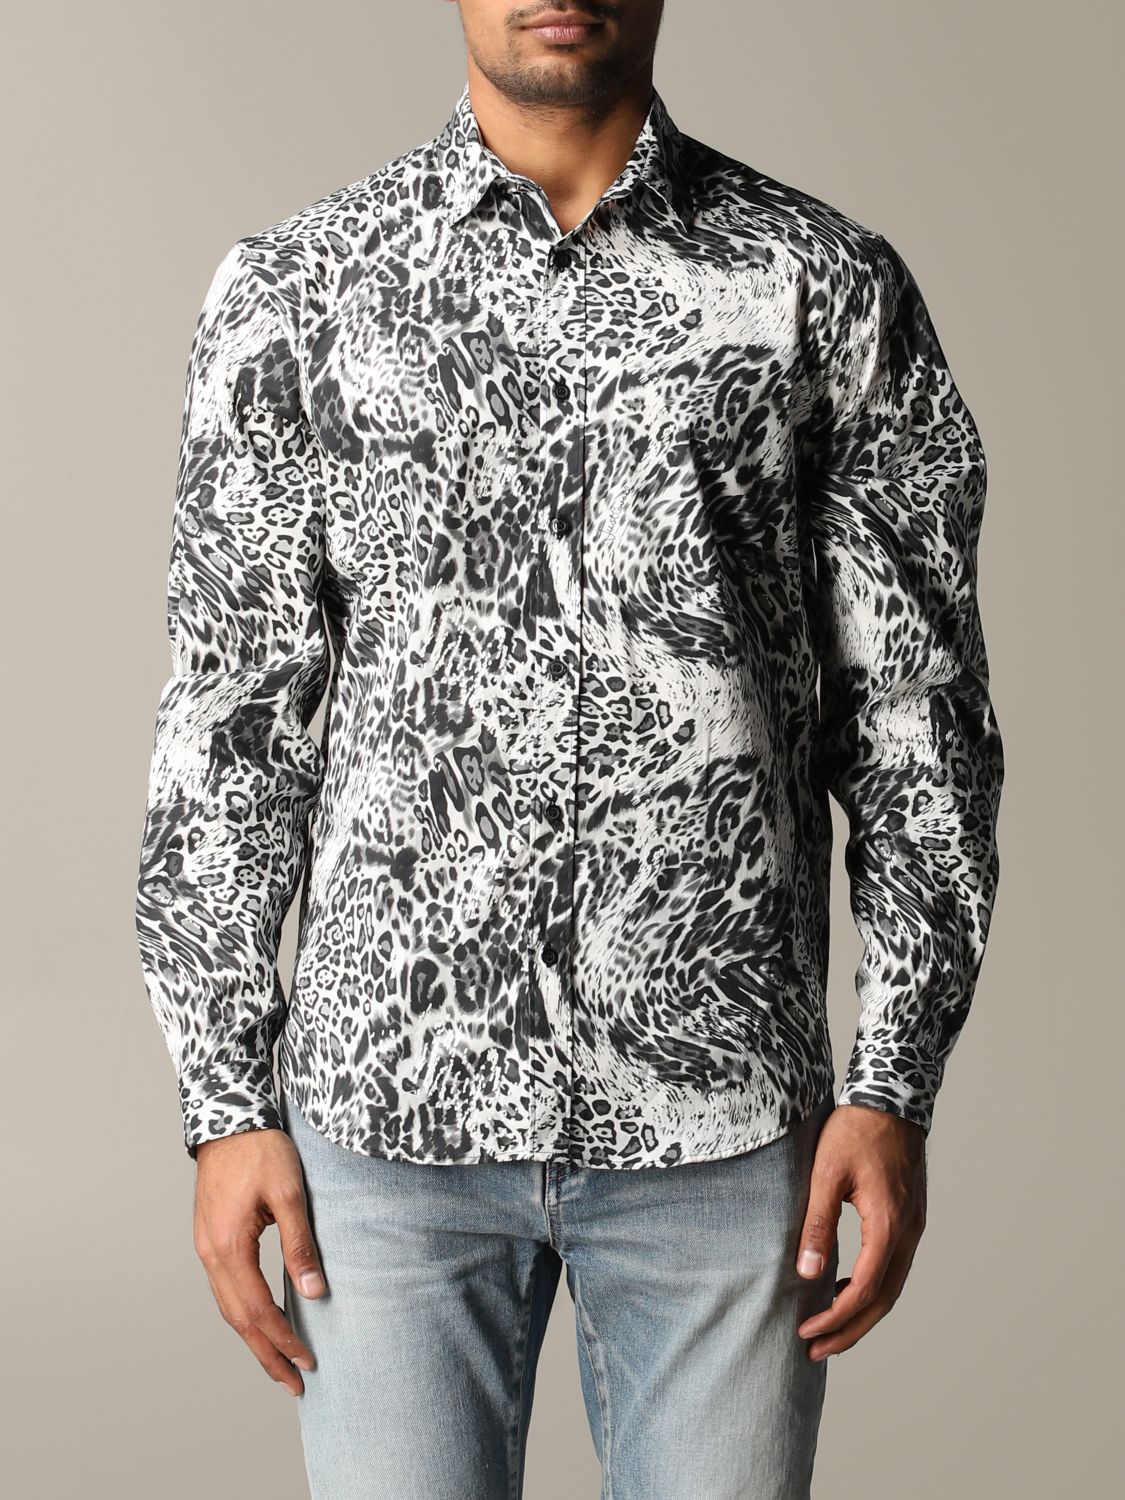 Just Cavalli Outlet: shirt for man - Multicolor | Just Cavalli shirt ...